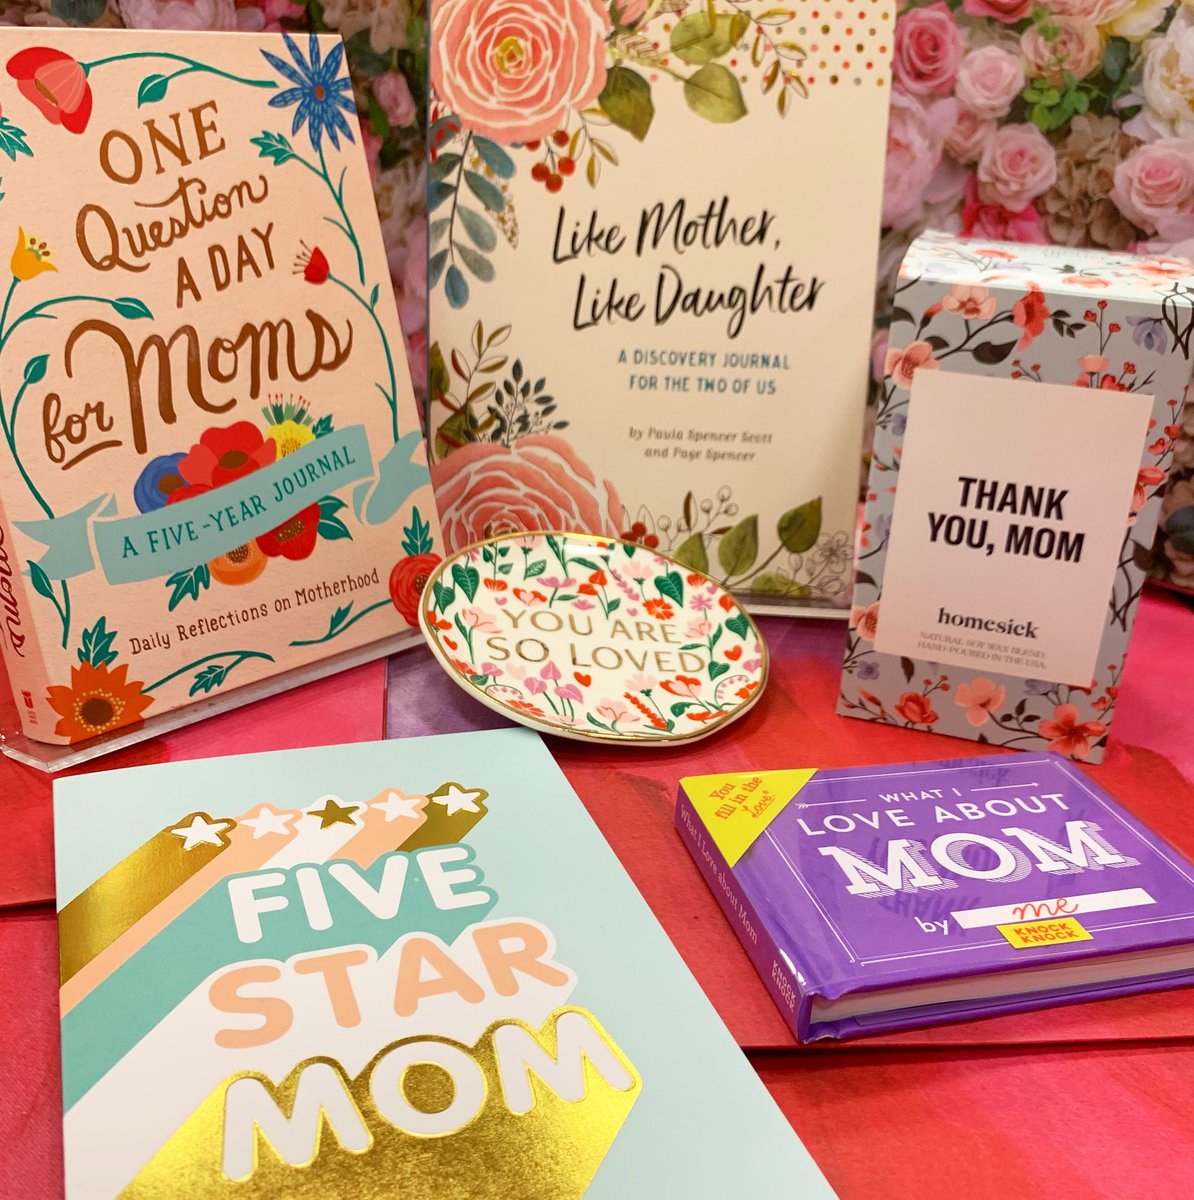 To the ones who read to us when we we young, Happy Mother’s Day from Barnes & Noble Frisco!